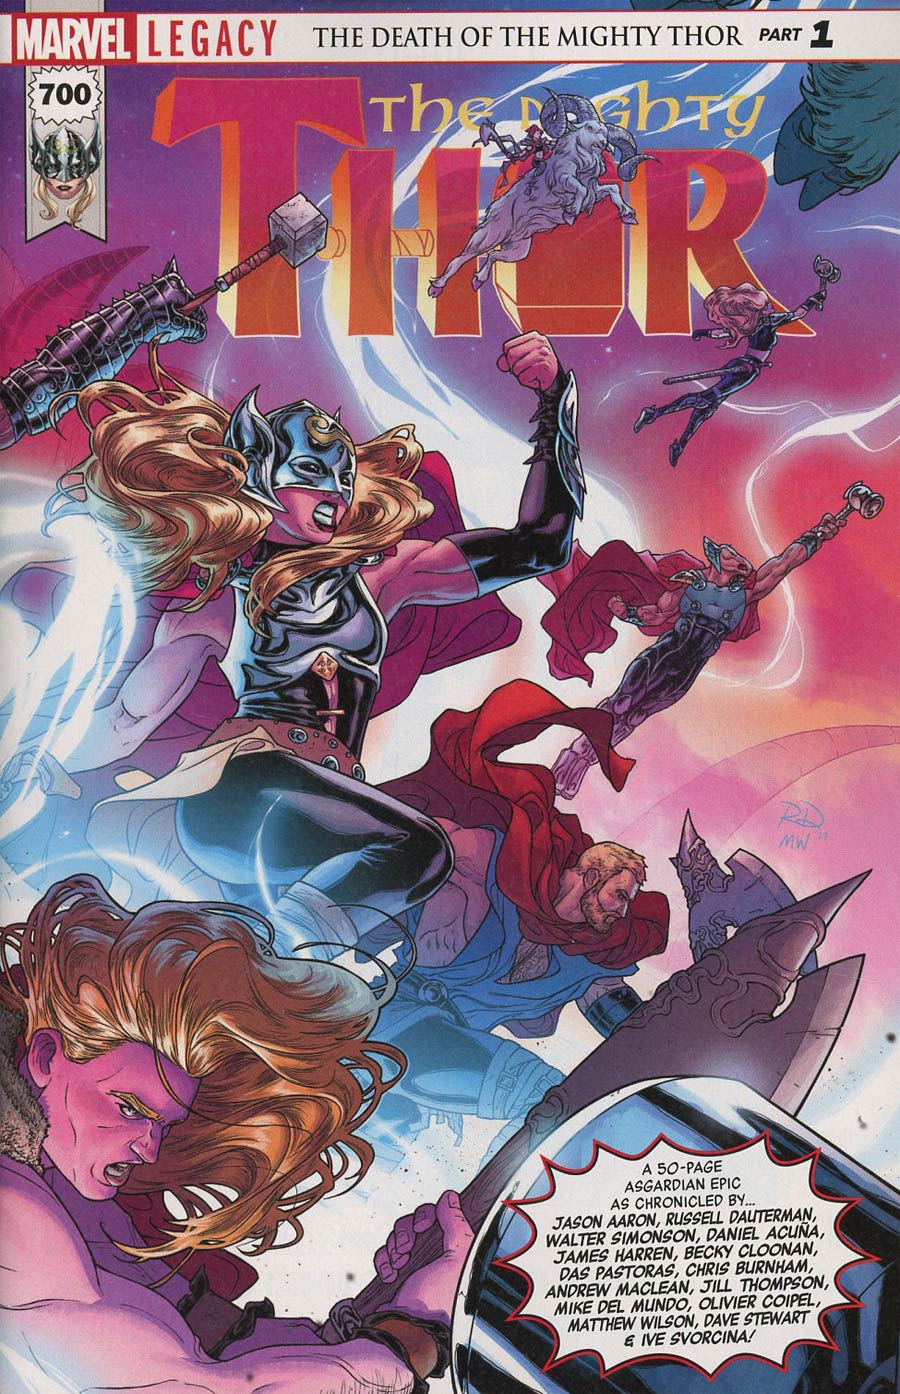 Mighty Thor Vol 2 #700 Cover A 1st Ptg Regular Russell Dauterman Wraparound Cover (Marvel Legacy Tie-In)